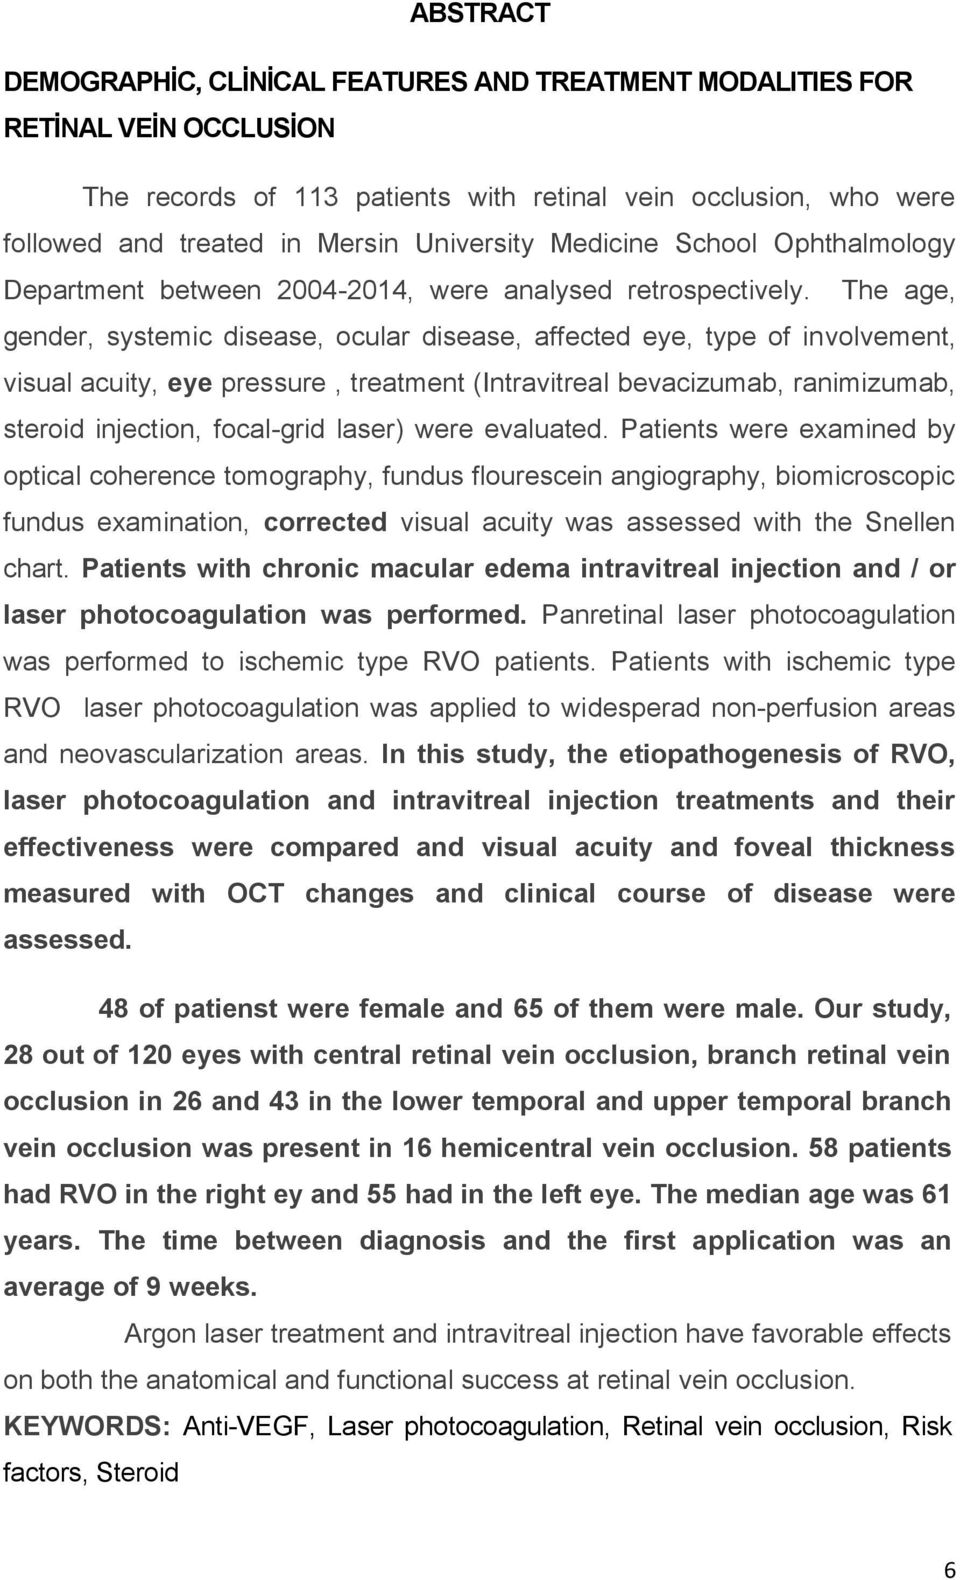 The age, gender, systemic disease, ocular disease, affected eye, type of involvement, visual acuity, eye pressure, treatment (Intravitreal bevacizumab, ranimizumab, steroid injection, focal-grid